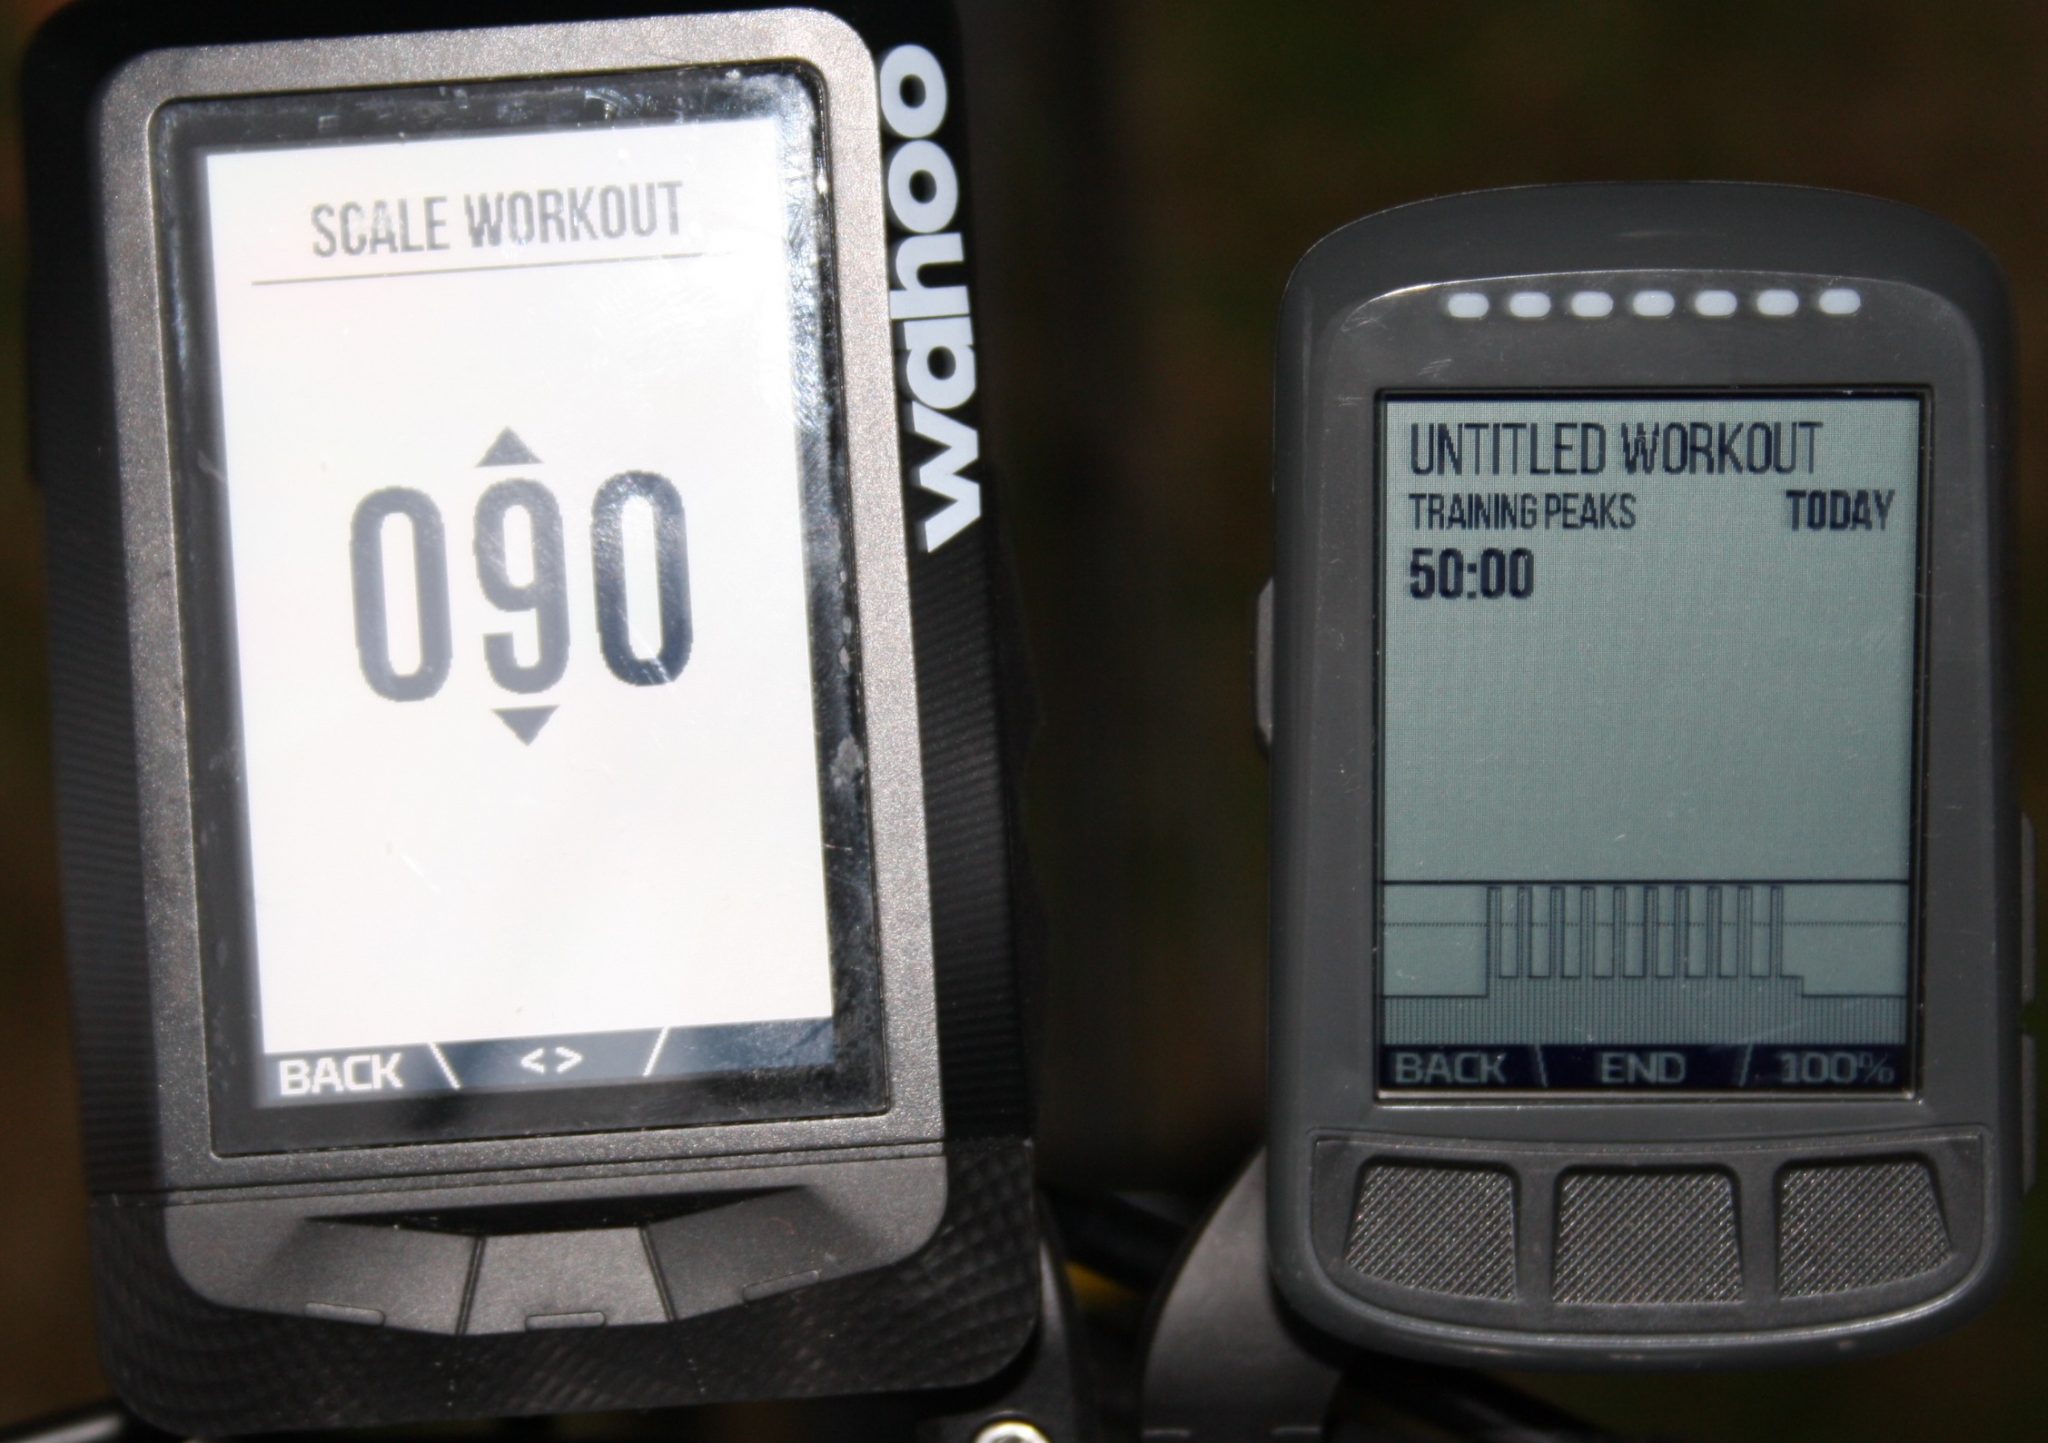 WAHOO ELEMNT / BOLT on the wahoo kickr kickr17 smart trainer review